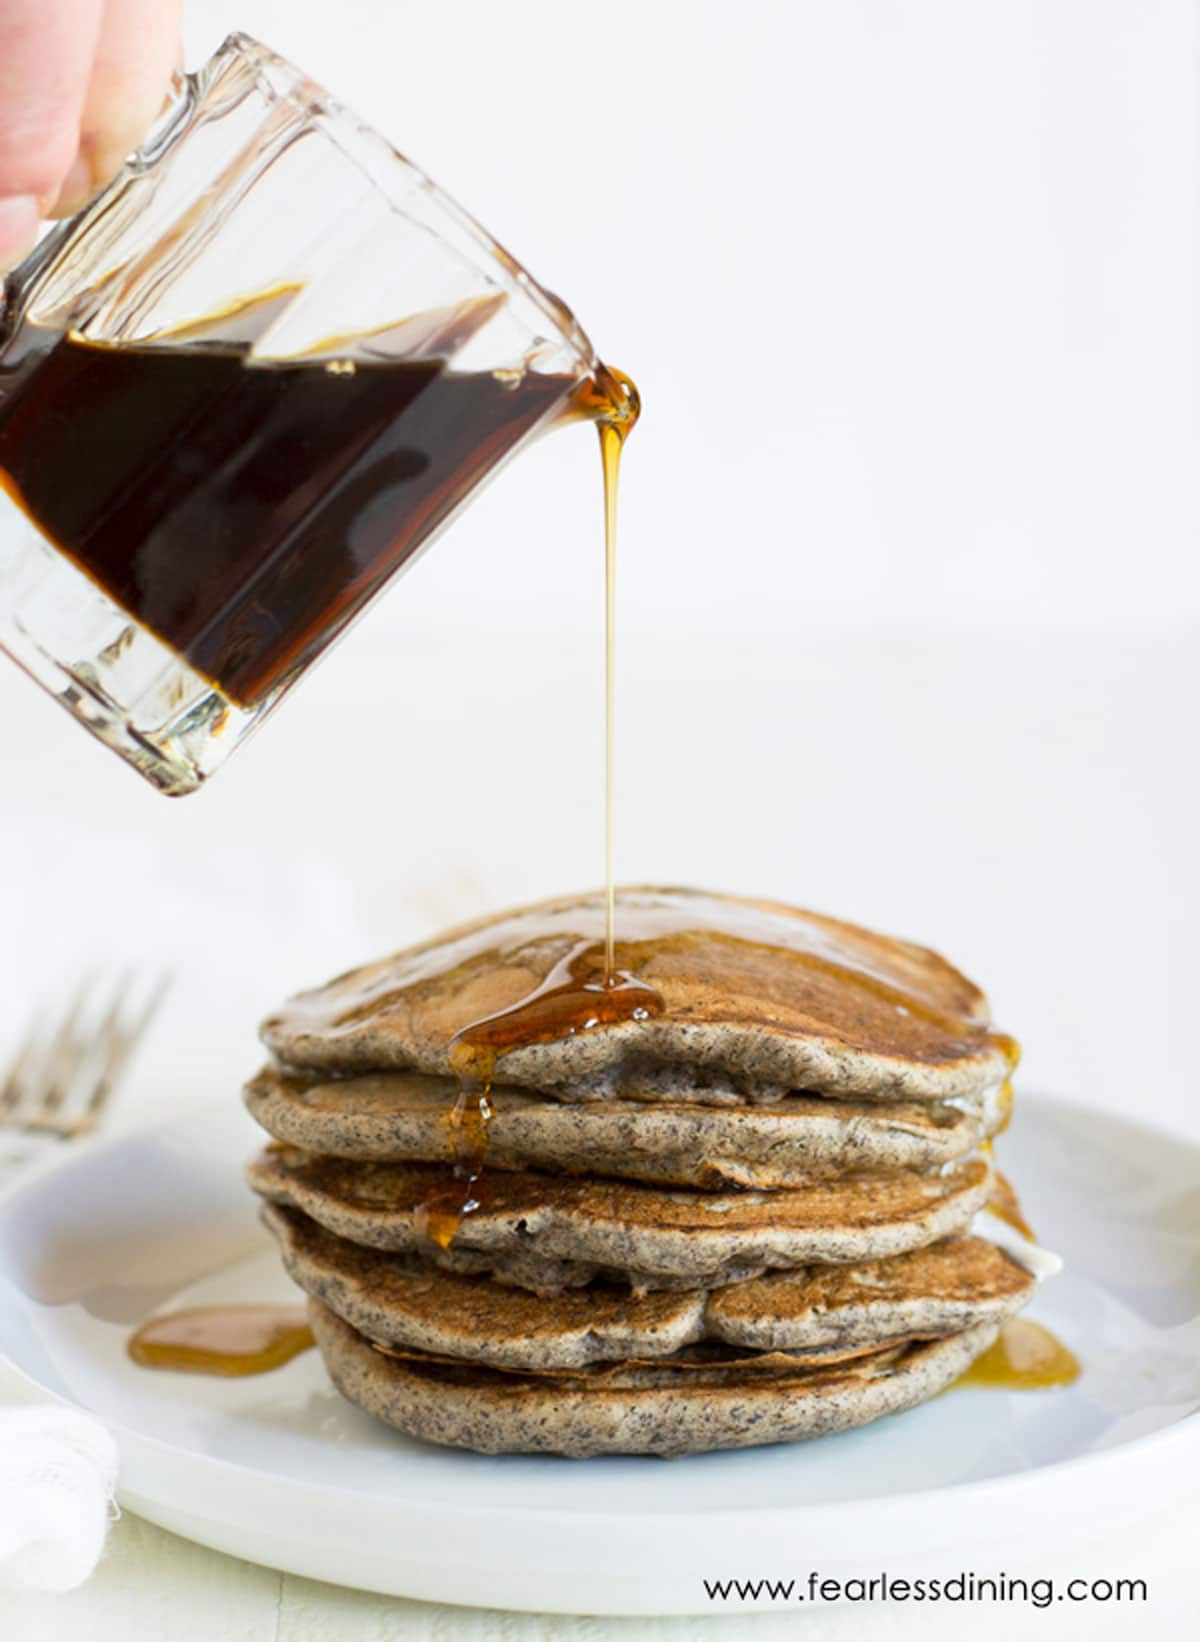 Pouring syrup over a stack of buckwheat pancakes.